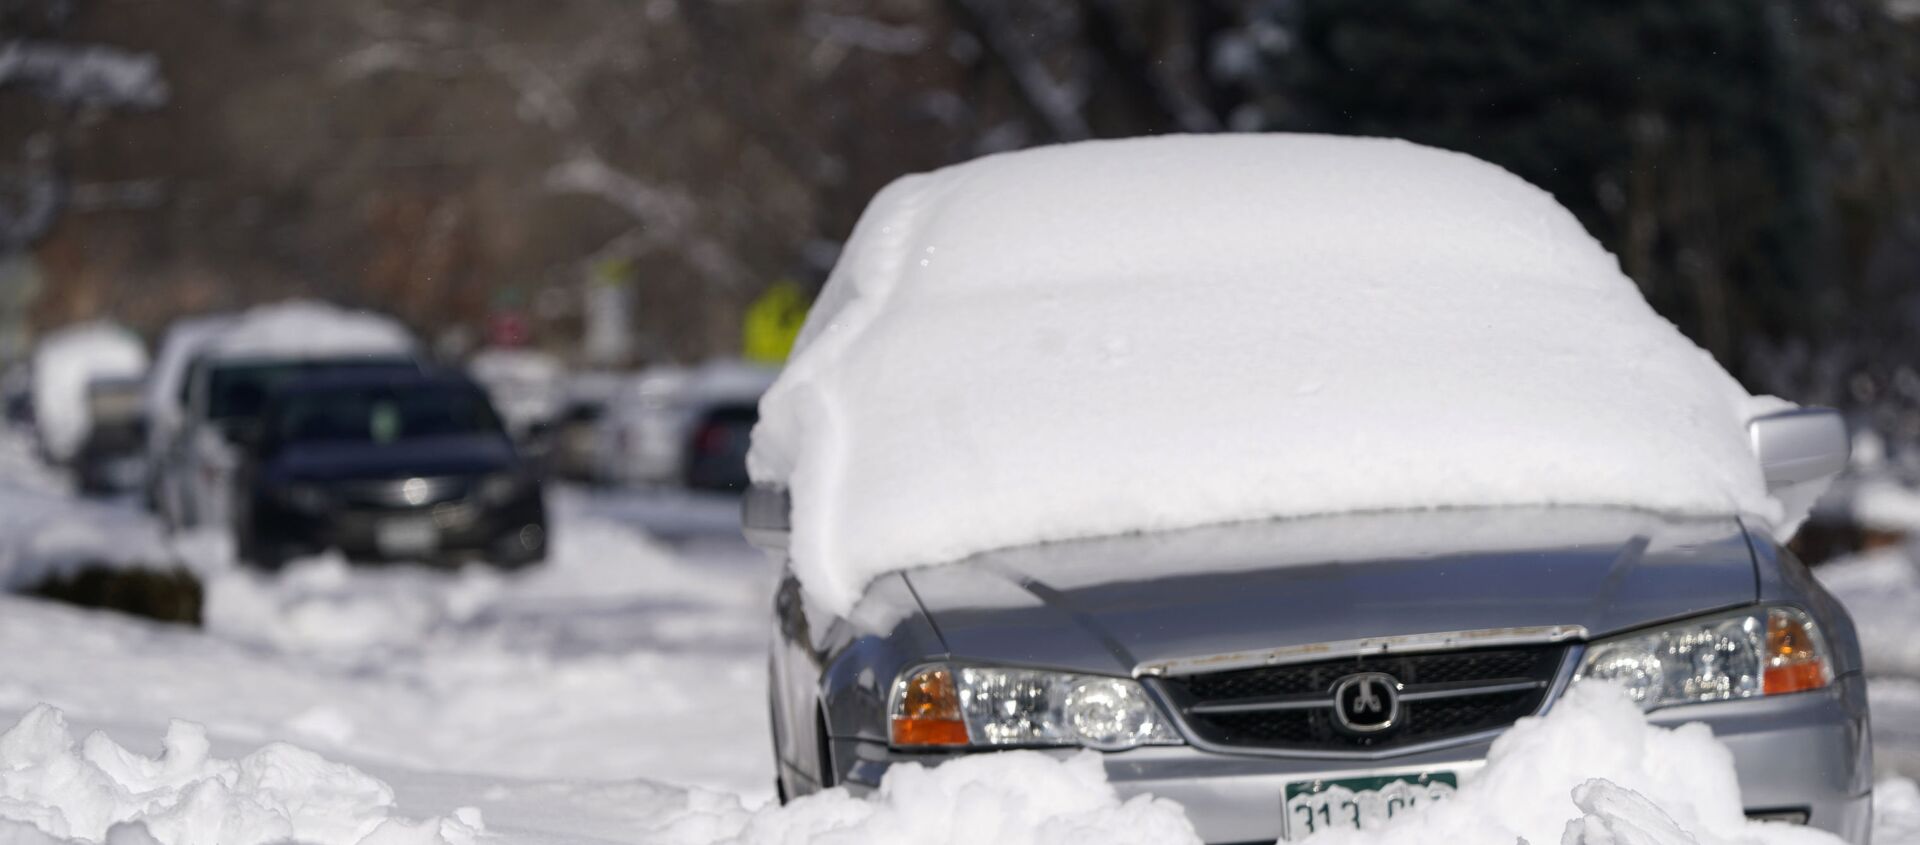 A sedan is buried after more than a foot of snow left by a late winter storm that swept over the region Thursday, Feb. 25, 2021, in Denver.  - Sputnik International, 1920, 13.03.2021